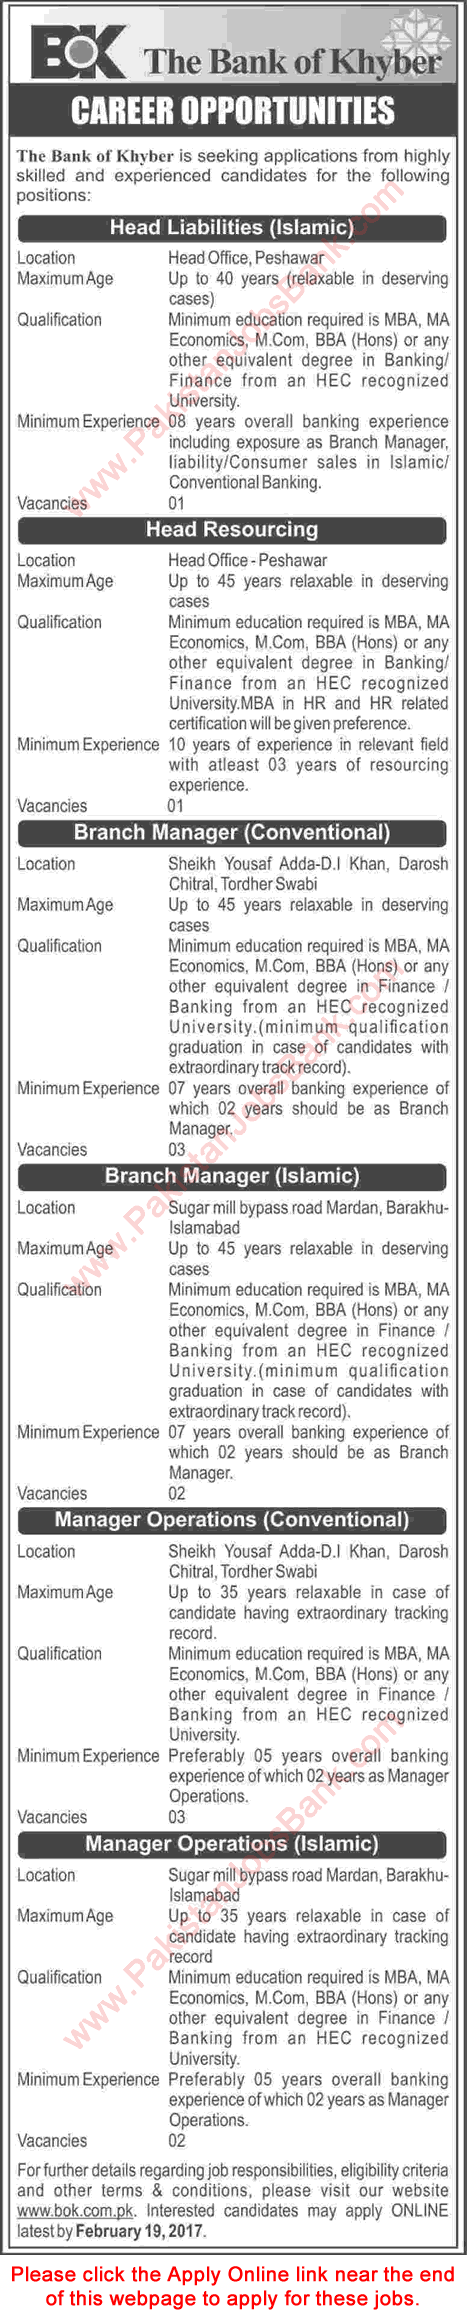 Bank of Khyber Jobs 2017 February Apply Online Branch / Operation Managers & Others BOK Latest